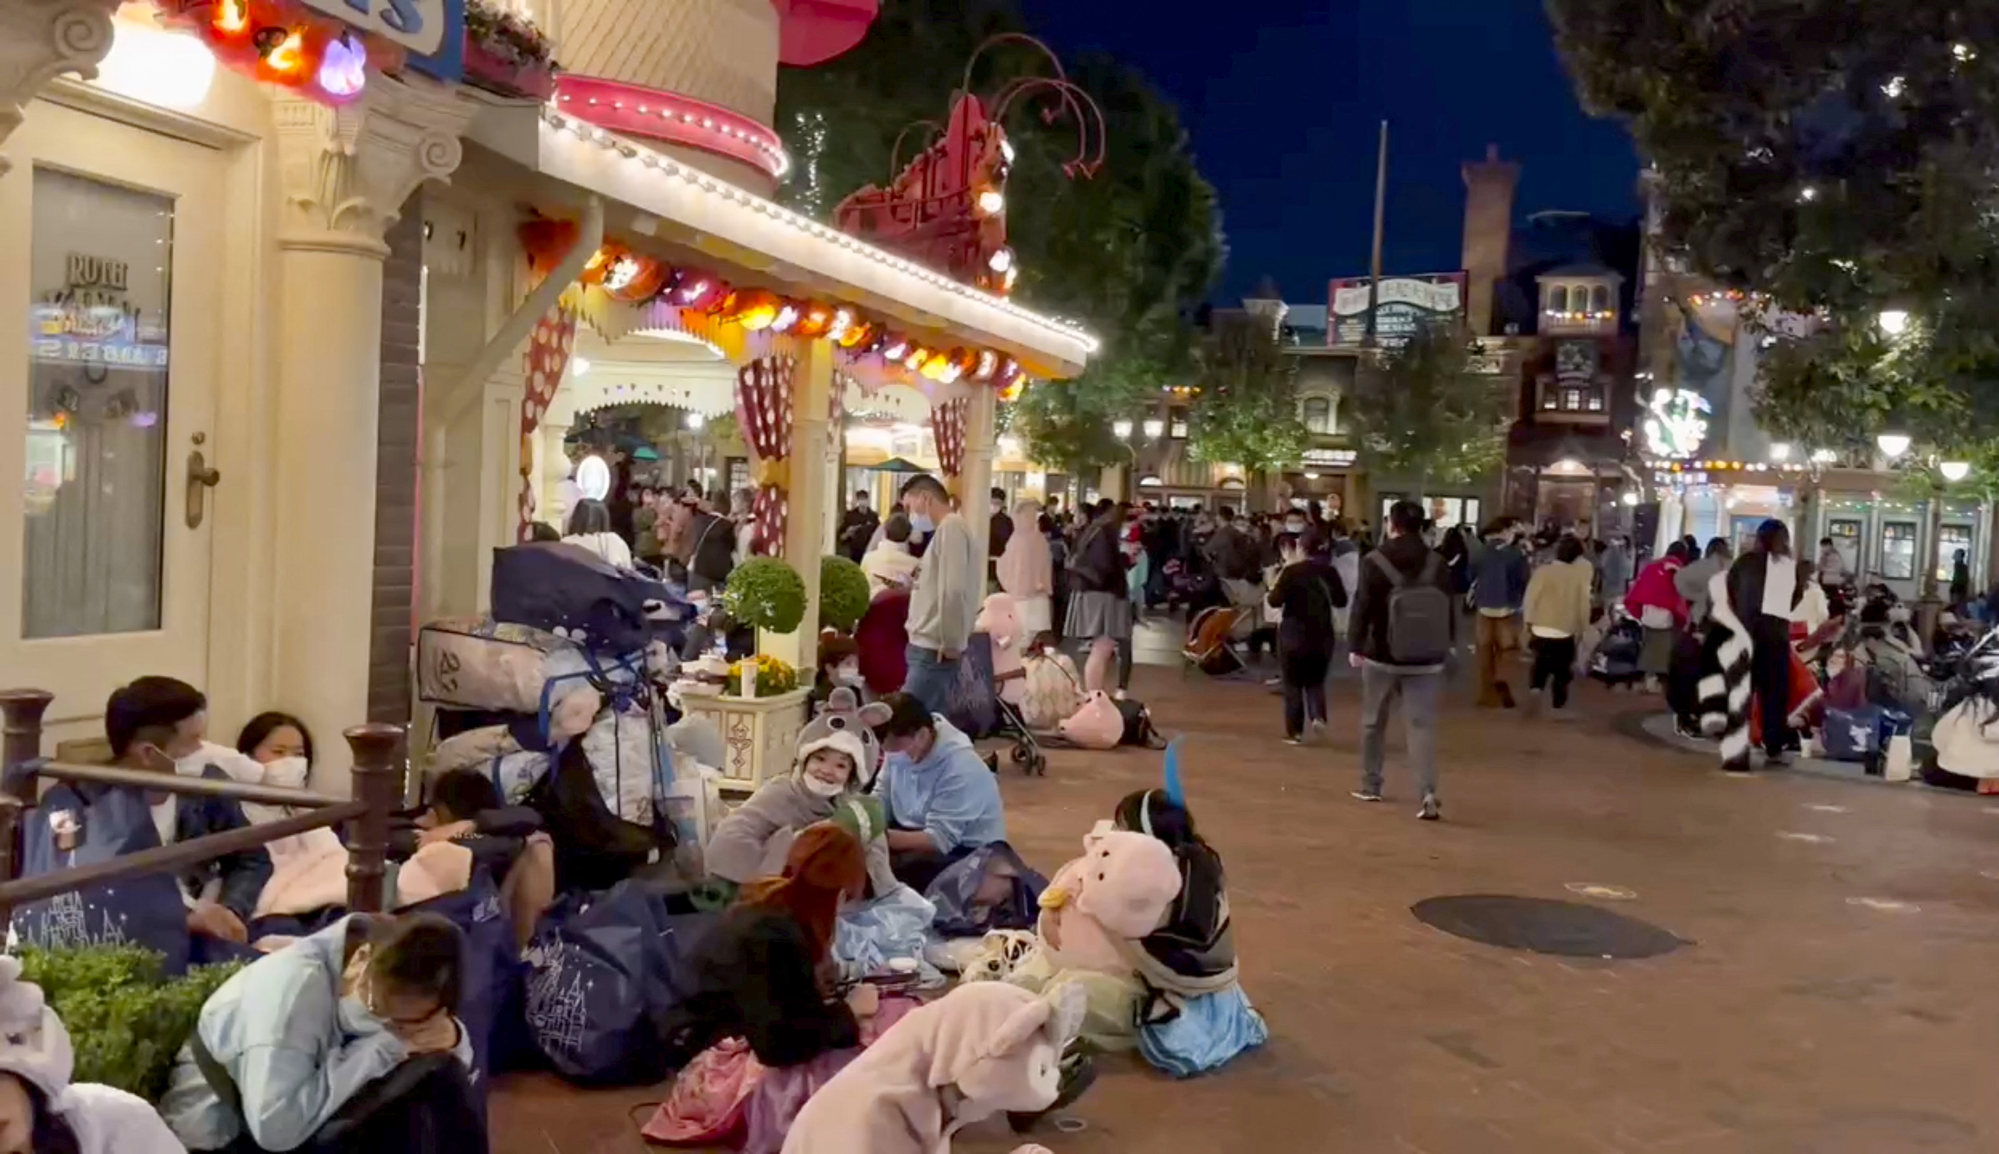 People sit inside the Shanghai Disney Resort in Shanghai on October 31, 2022, when thousands of visitors were held in the park for testing amid a Covid-19 outbreak. Image: Screen grab from a video obtained by Reuters.